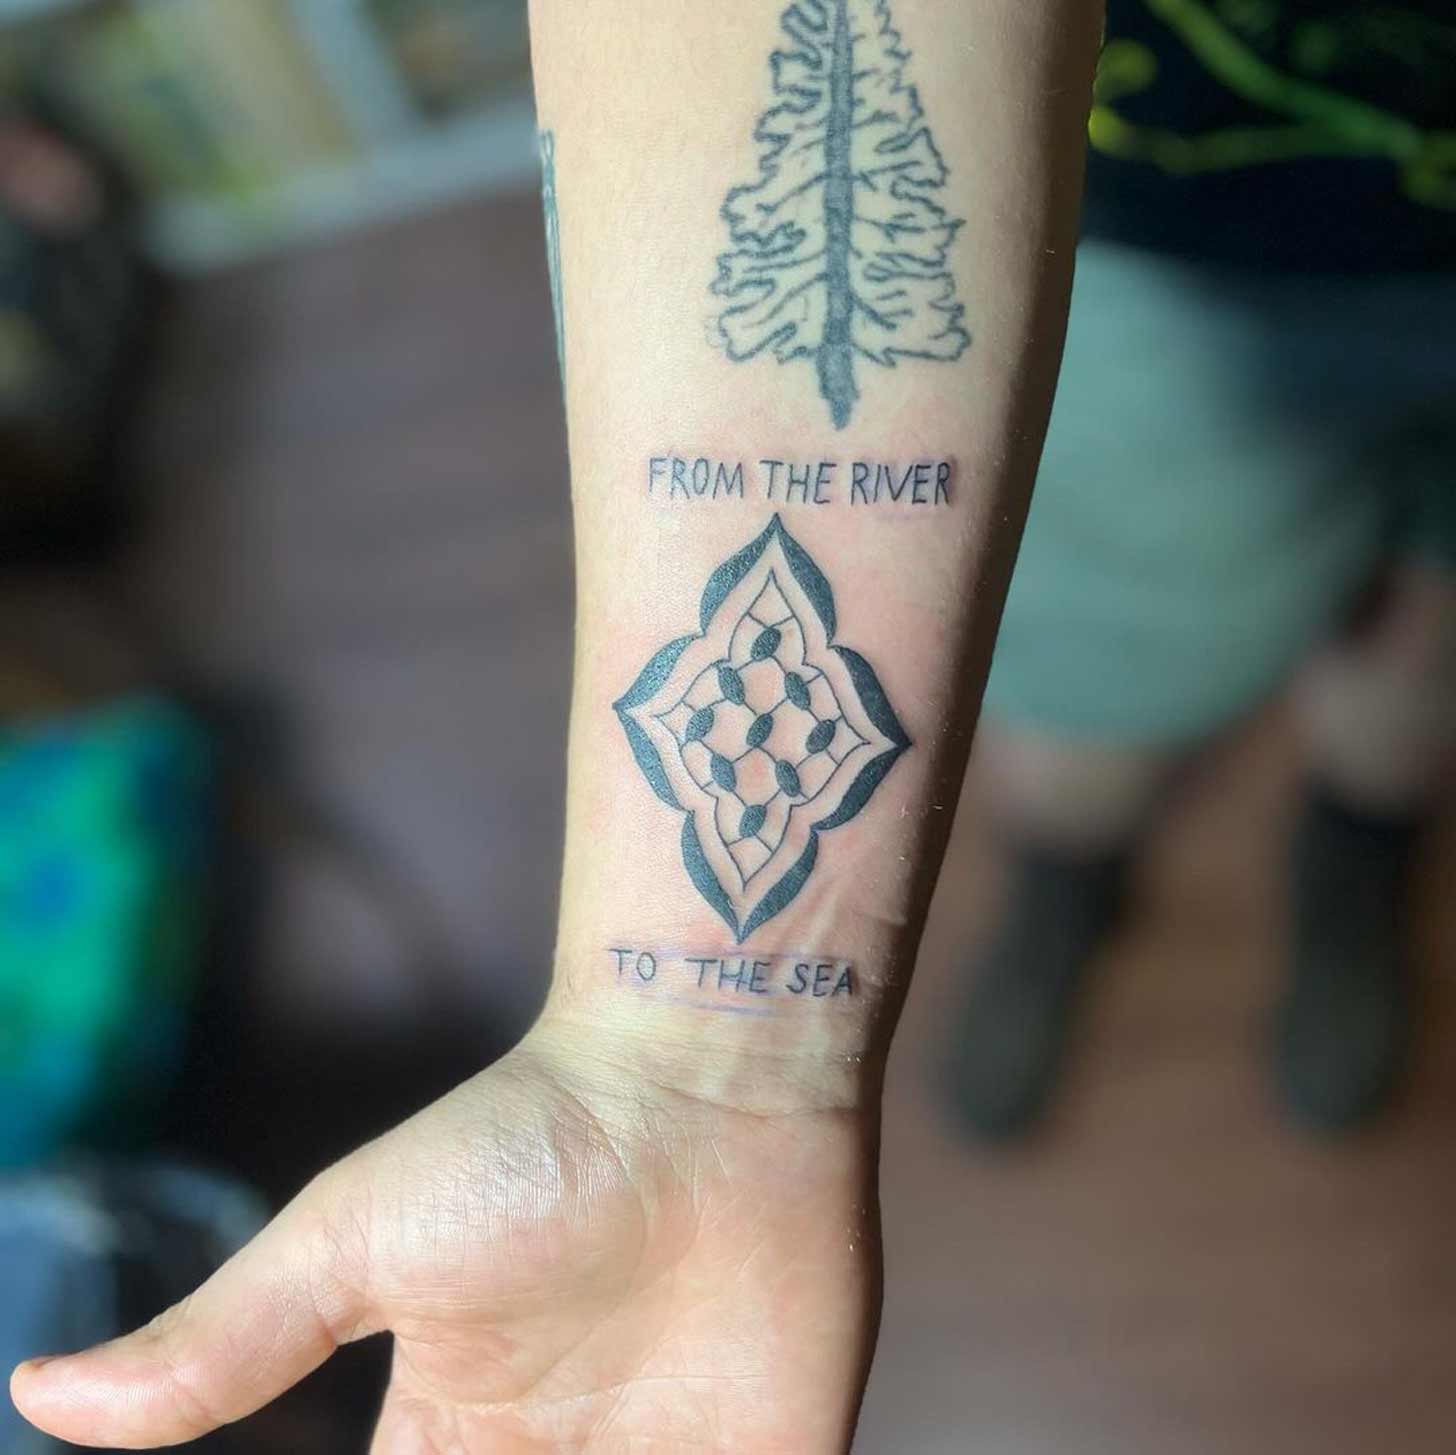 A tattoo that reads "from the river to the sea" with keffiyeh stitching done in support of the Hibr tattoo fundraiser 